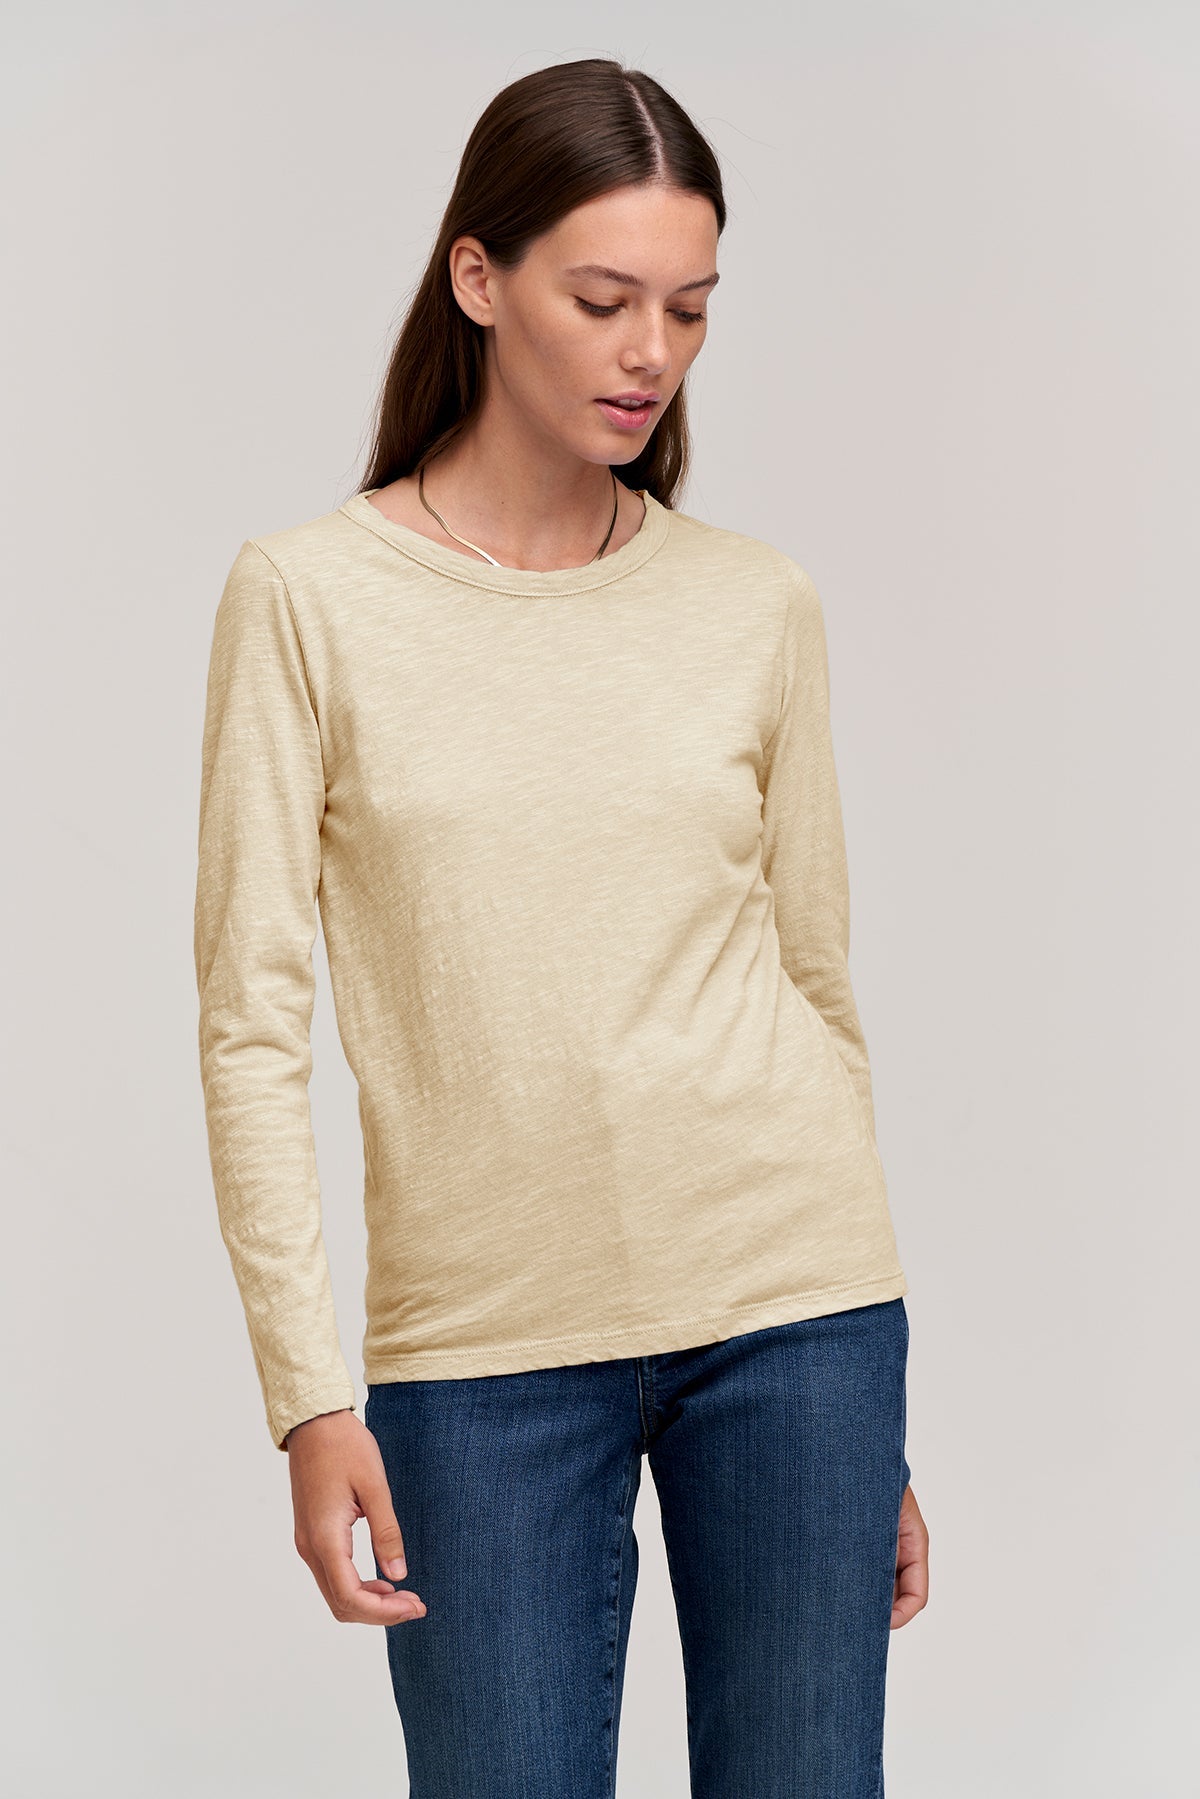   Lizzie long sleeve tee in sesame with blue denim front 